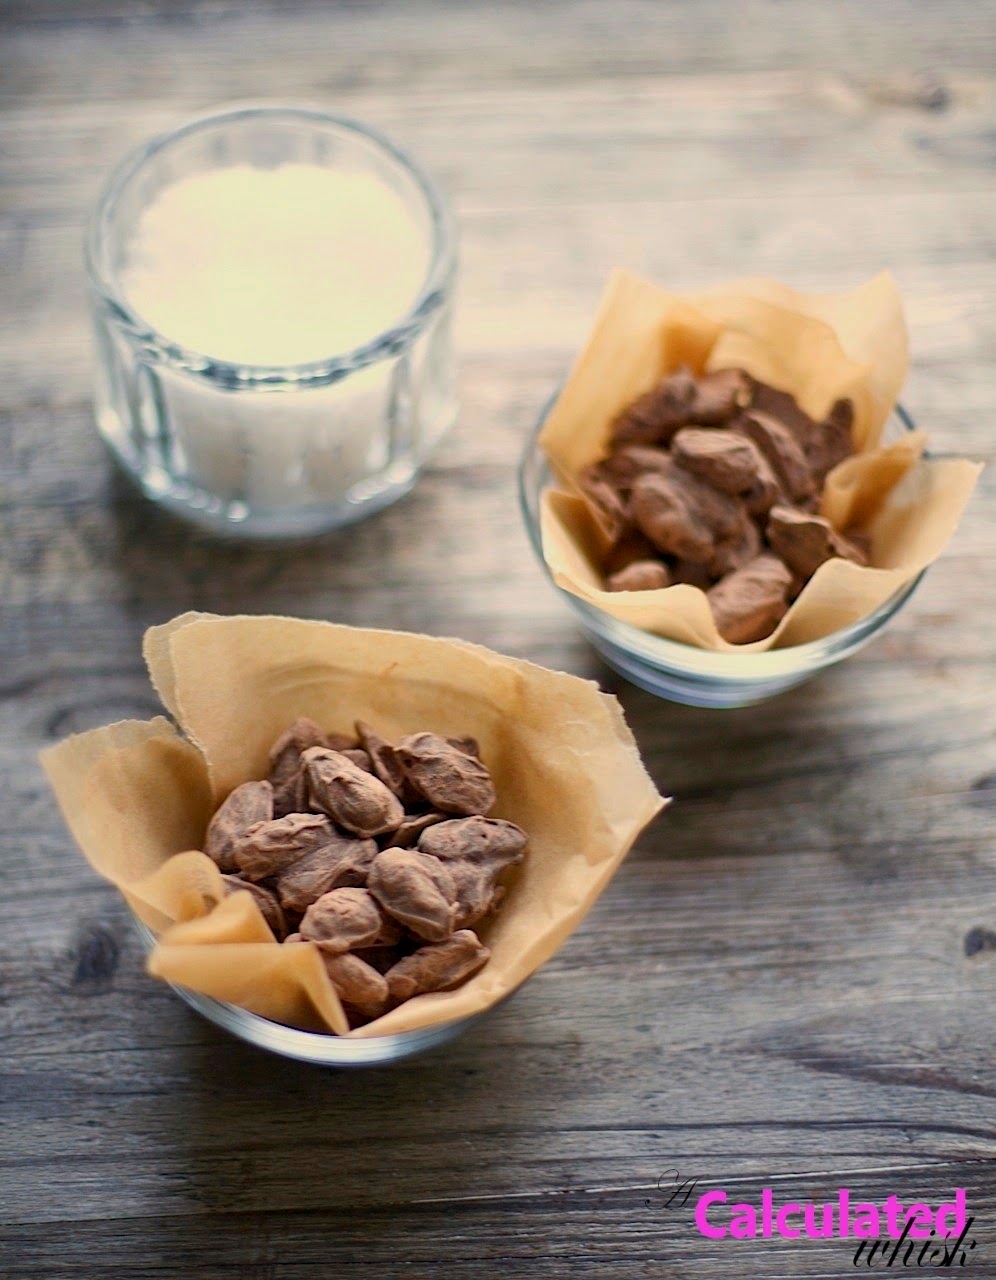 Chocolate-Covered Almonds | 10 Paleo Recipes for Summertime Celebrations on acalculatedwhisk.com